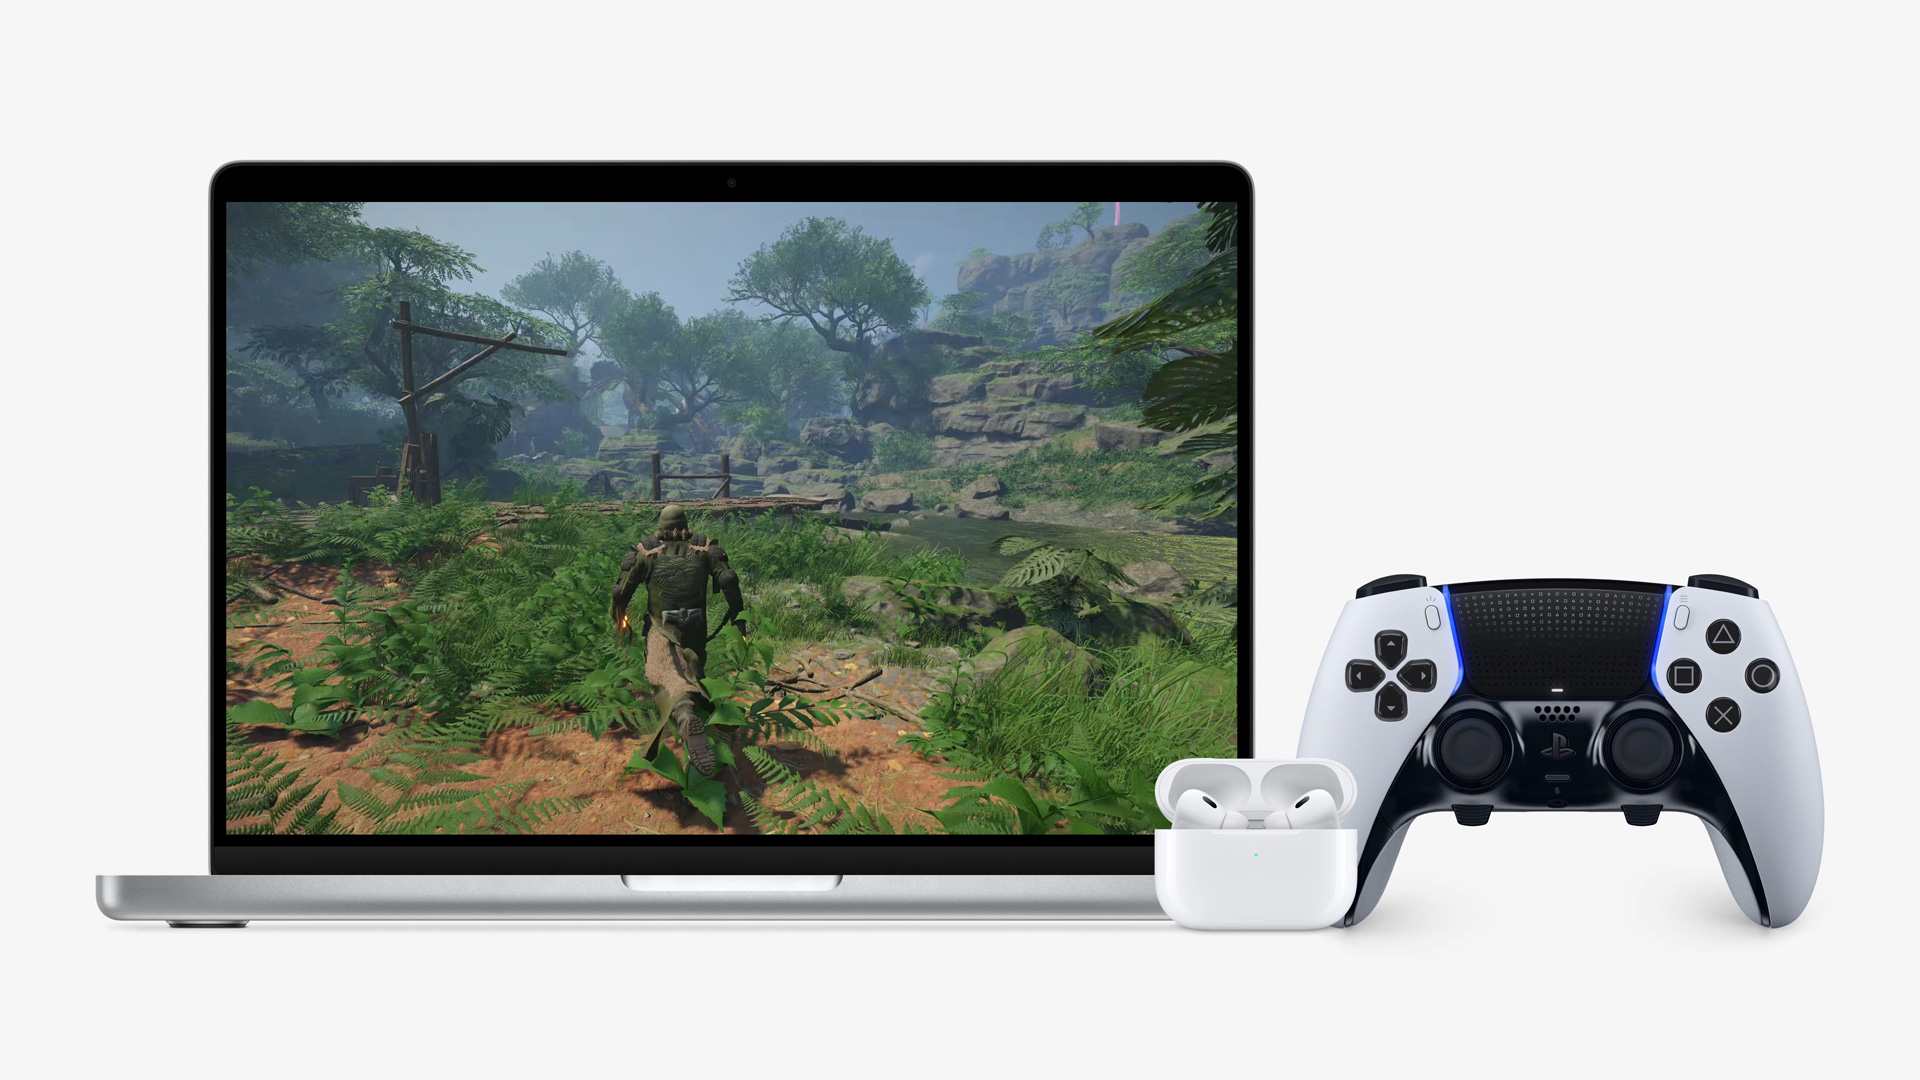 Marketing image showcasing gaming on a MacBook Pro using AirPods and a PS5 controller